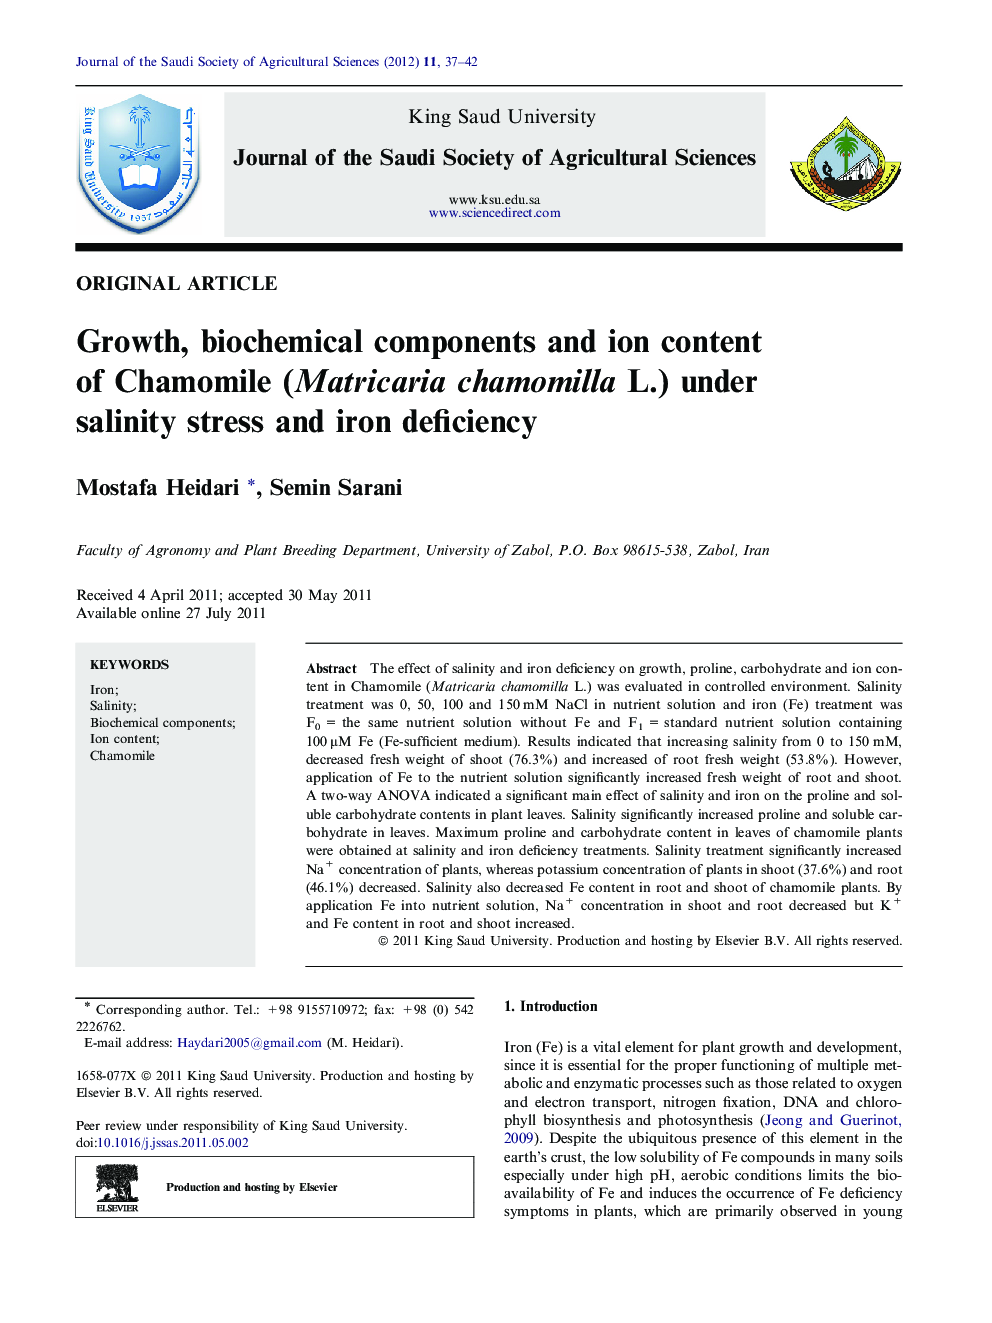 Growth, biochemical components and ion content of Chamomile (Matricaria chamomilla L.) under salinity stress and iron deficiency